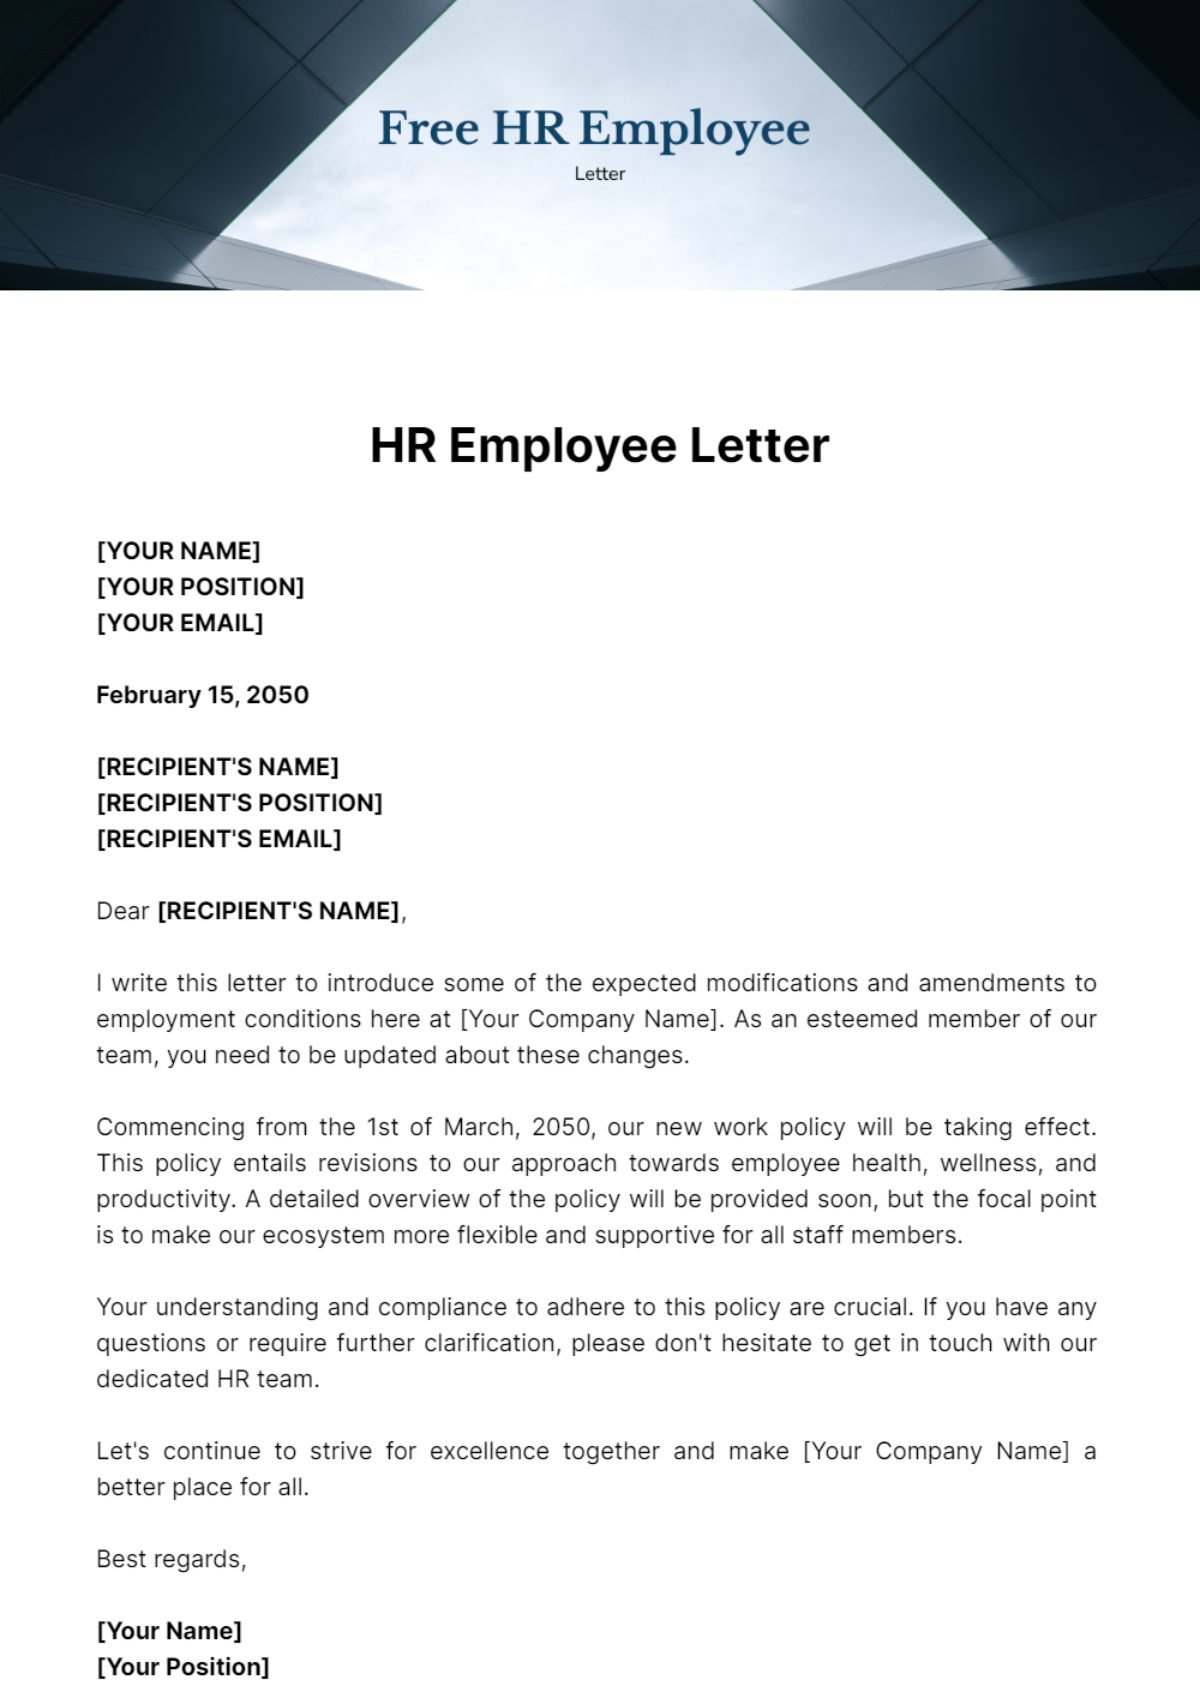 HR Employee Letter Template